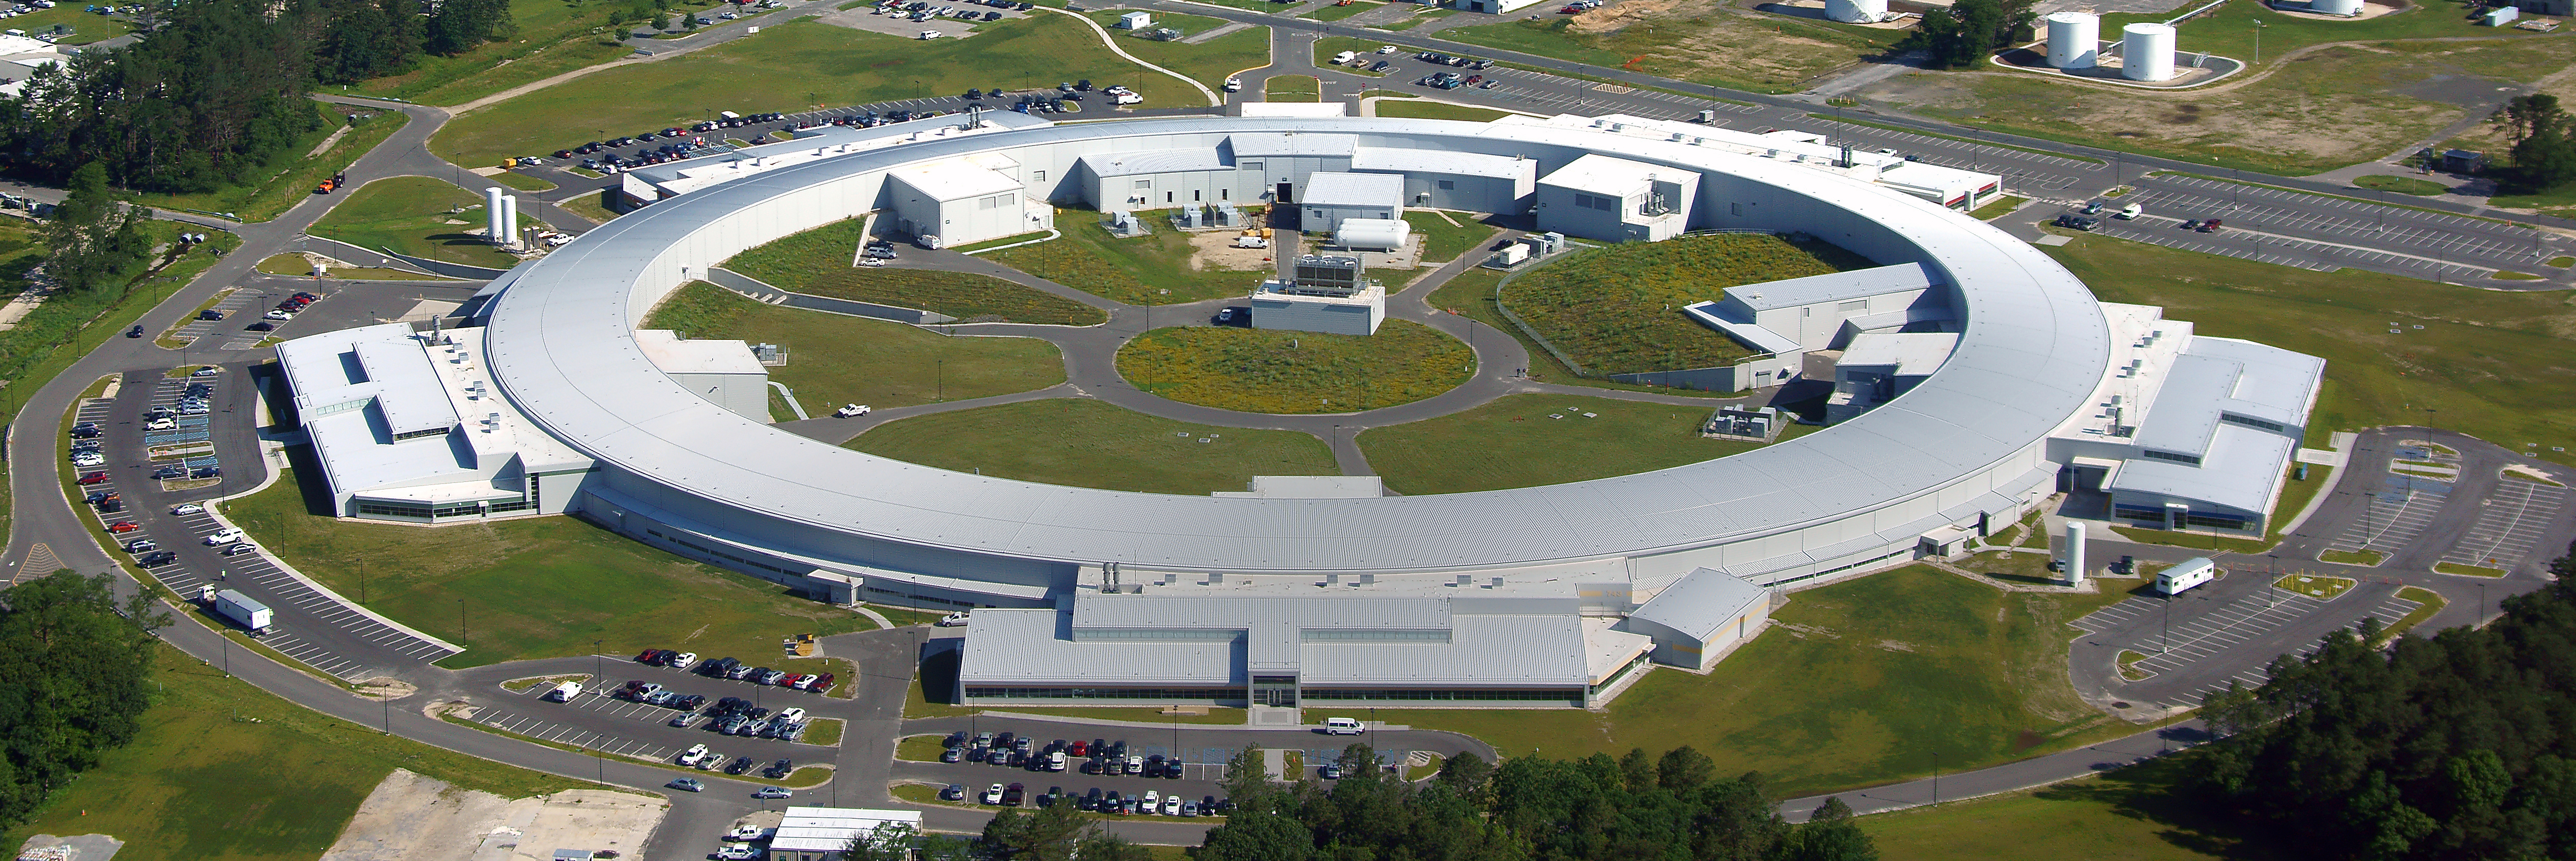 National Synchrotron Light Source II, Rendering of the Nati…